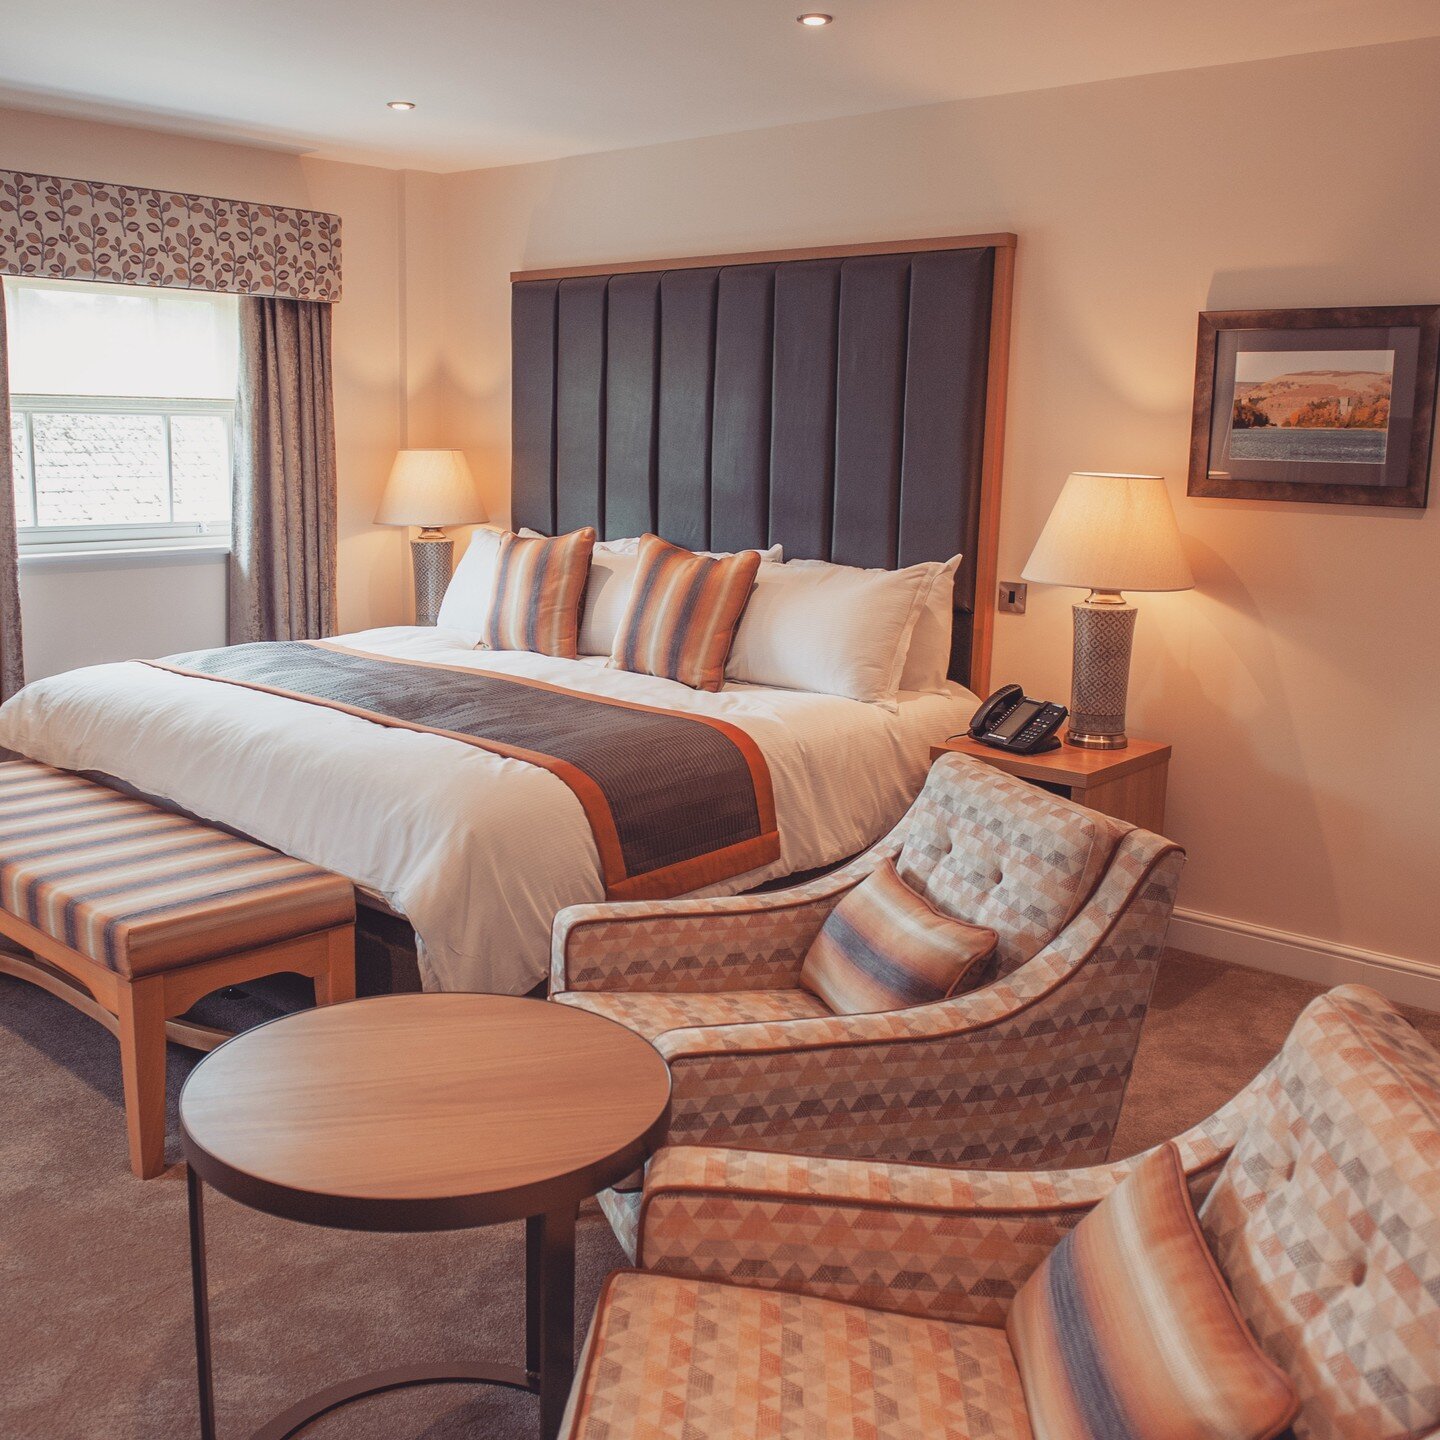 Treat Mum to an overnight stay in the heart of Bakewell.. or how about an afternoon tea with a bottle of prosecco courtesy of The H Bar and Restaurant, Bakewell 🍾🎁

Vouchers available now! 

To purchase please give our reception team a call: 01629 